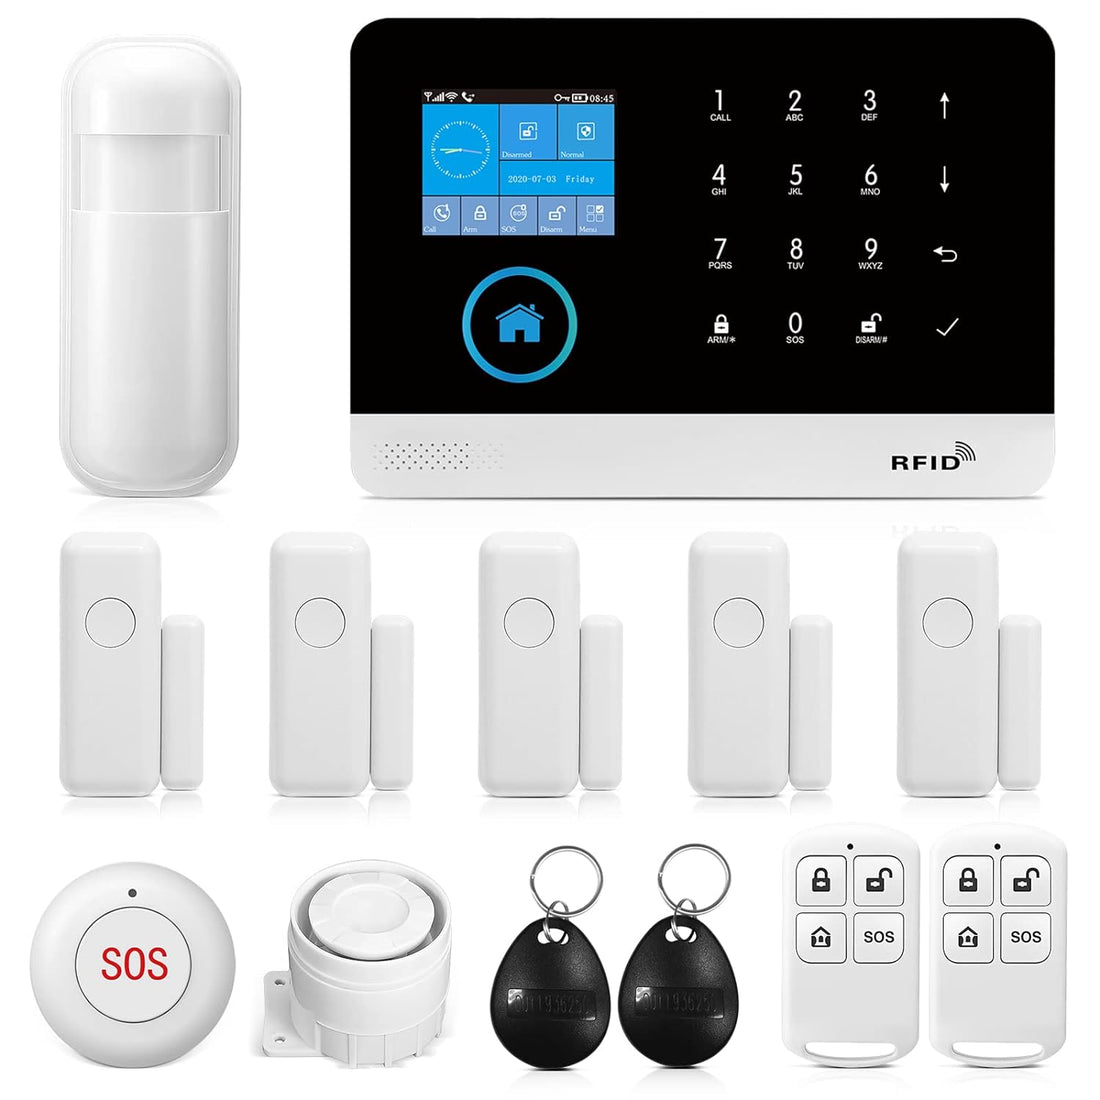 Wireless WiFi Smart Home Security DIY Alarm System DIY Home Wi-Fi Alarm Kit with Motion Detector,Notifications with app,Door/Window Sensor, Siren,Compatible with Alexa,NO Monthly Fees (LW-103)